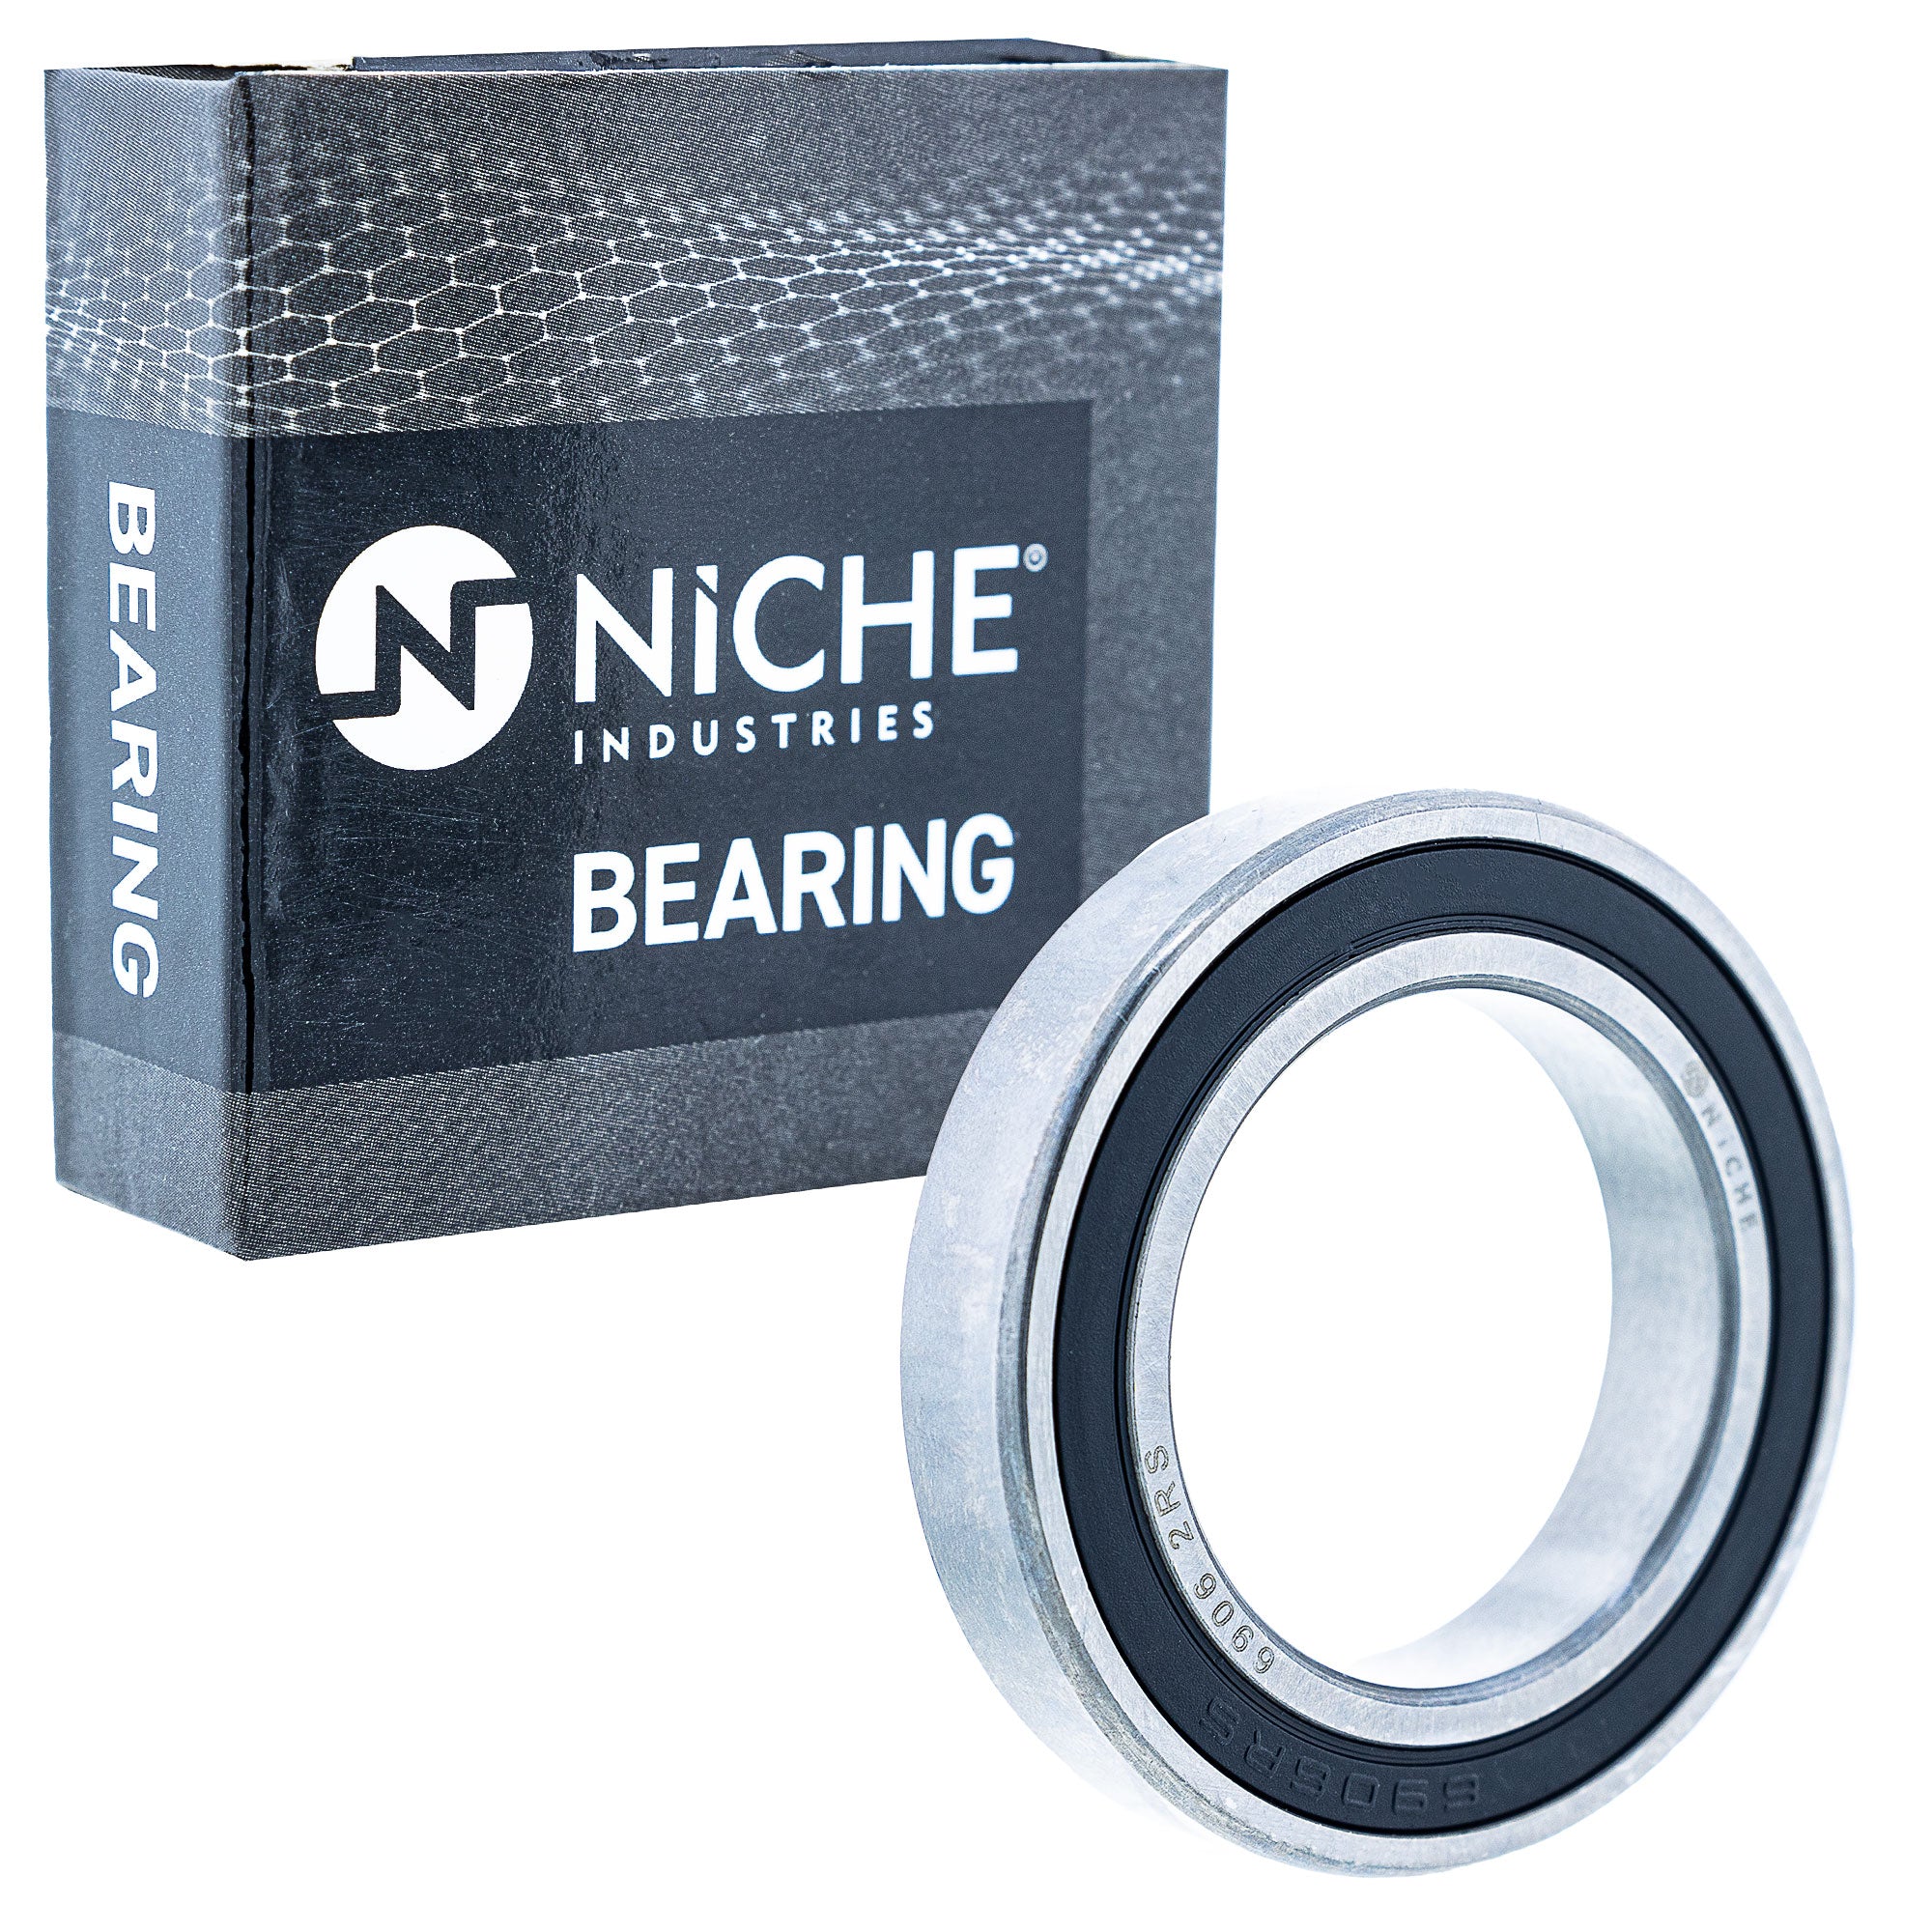 NICHE 519-CBB2250R Bearing for zOTHER 990 950 85 690